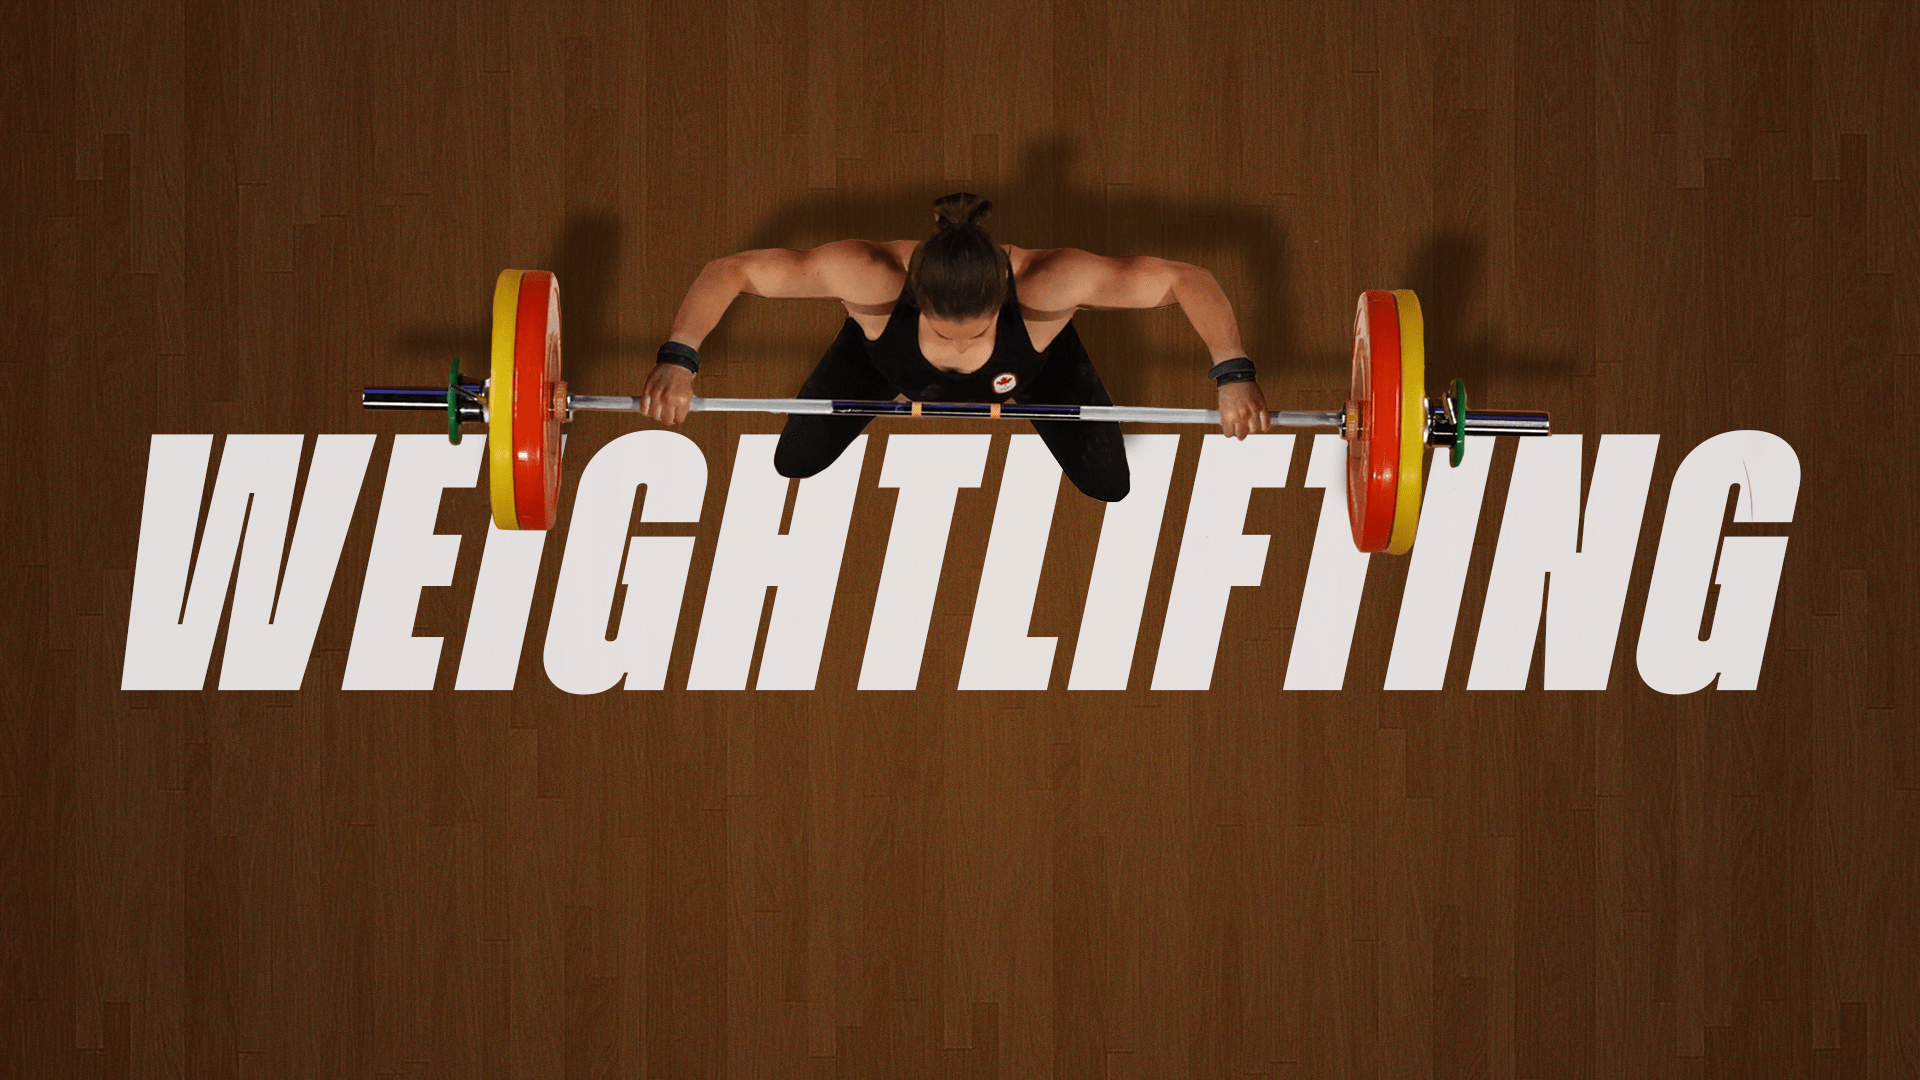 Stream Weightlifting I Watch sports online today on Fast TV